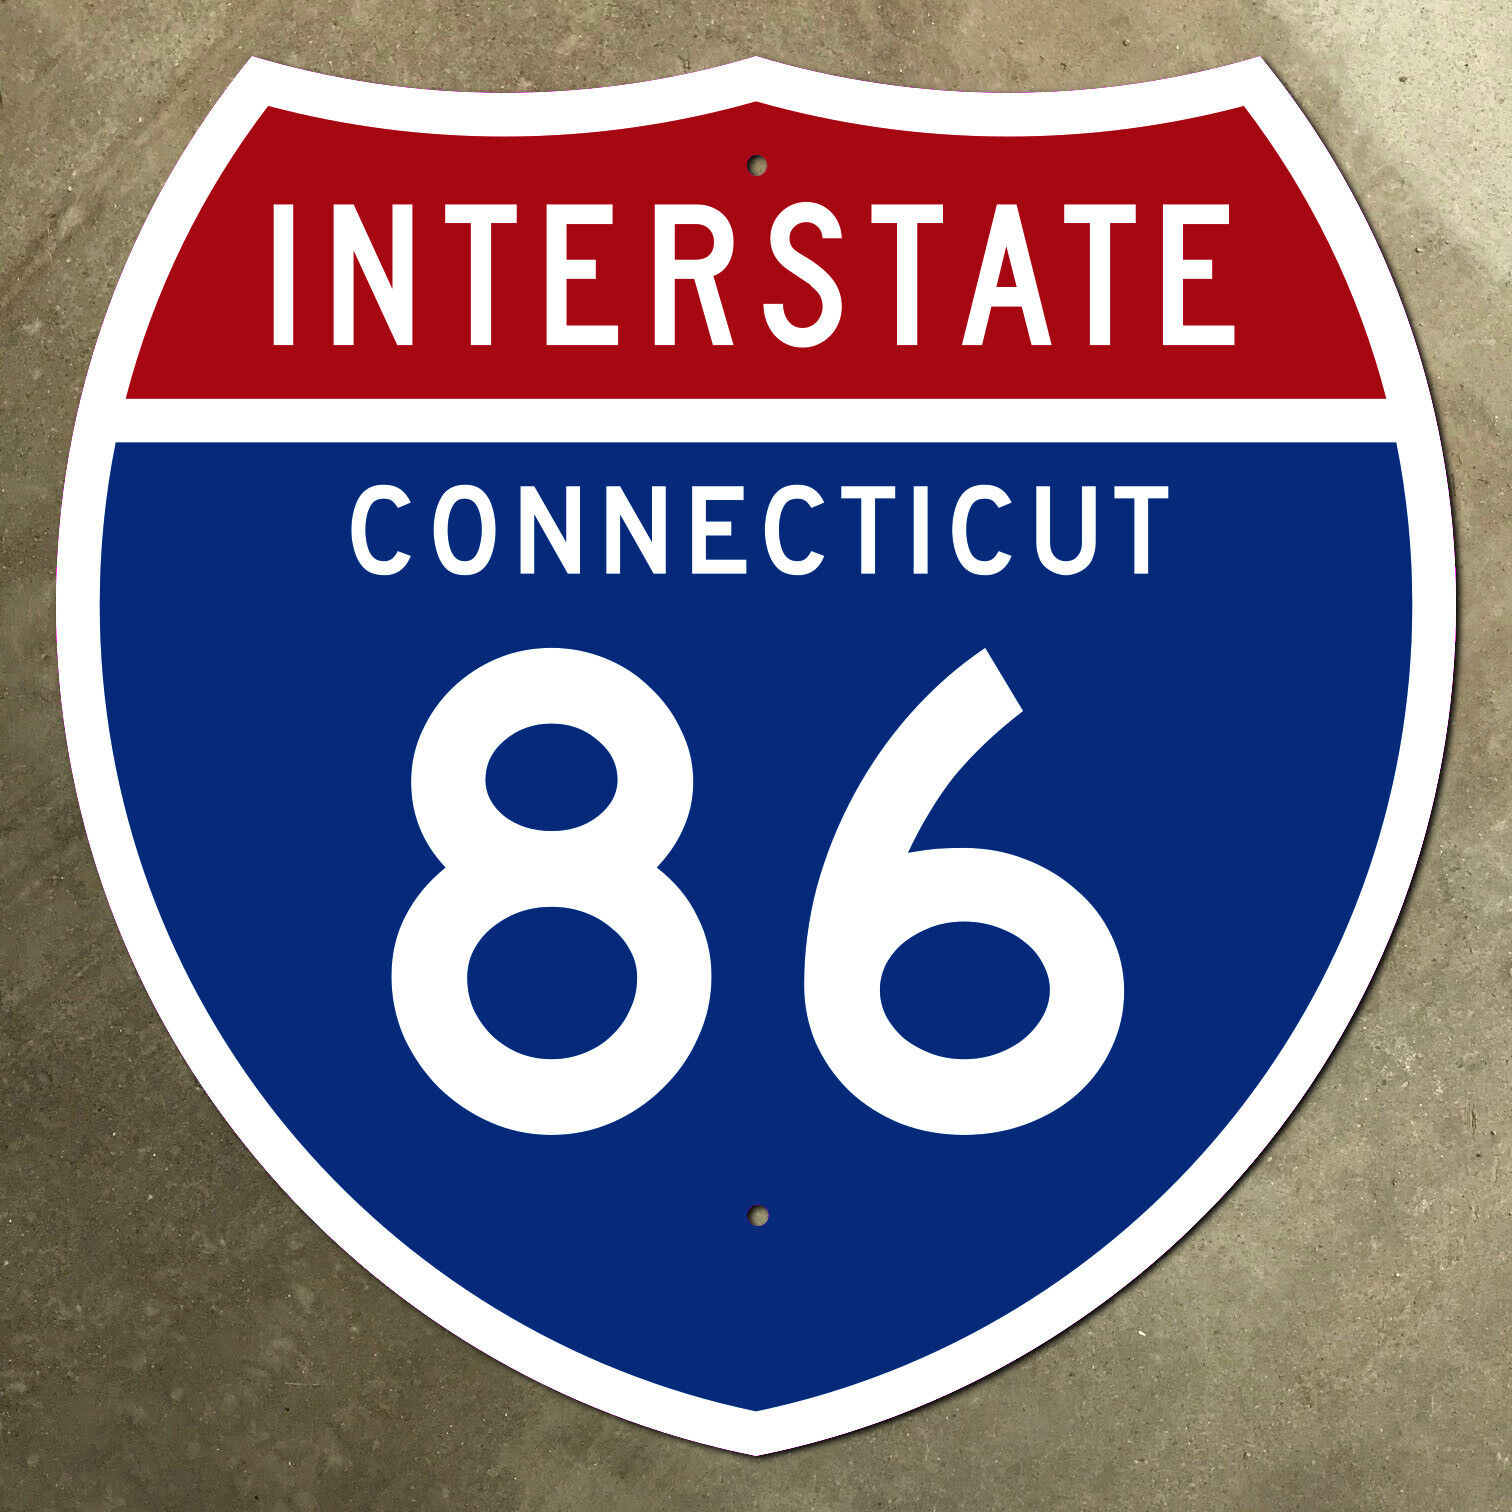 Connecticut interstate 86 Hartford highway route marker road sign 1957 18x18